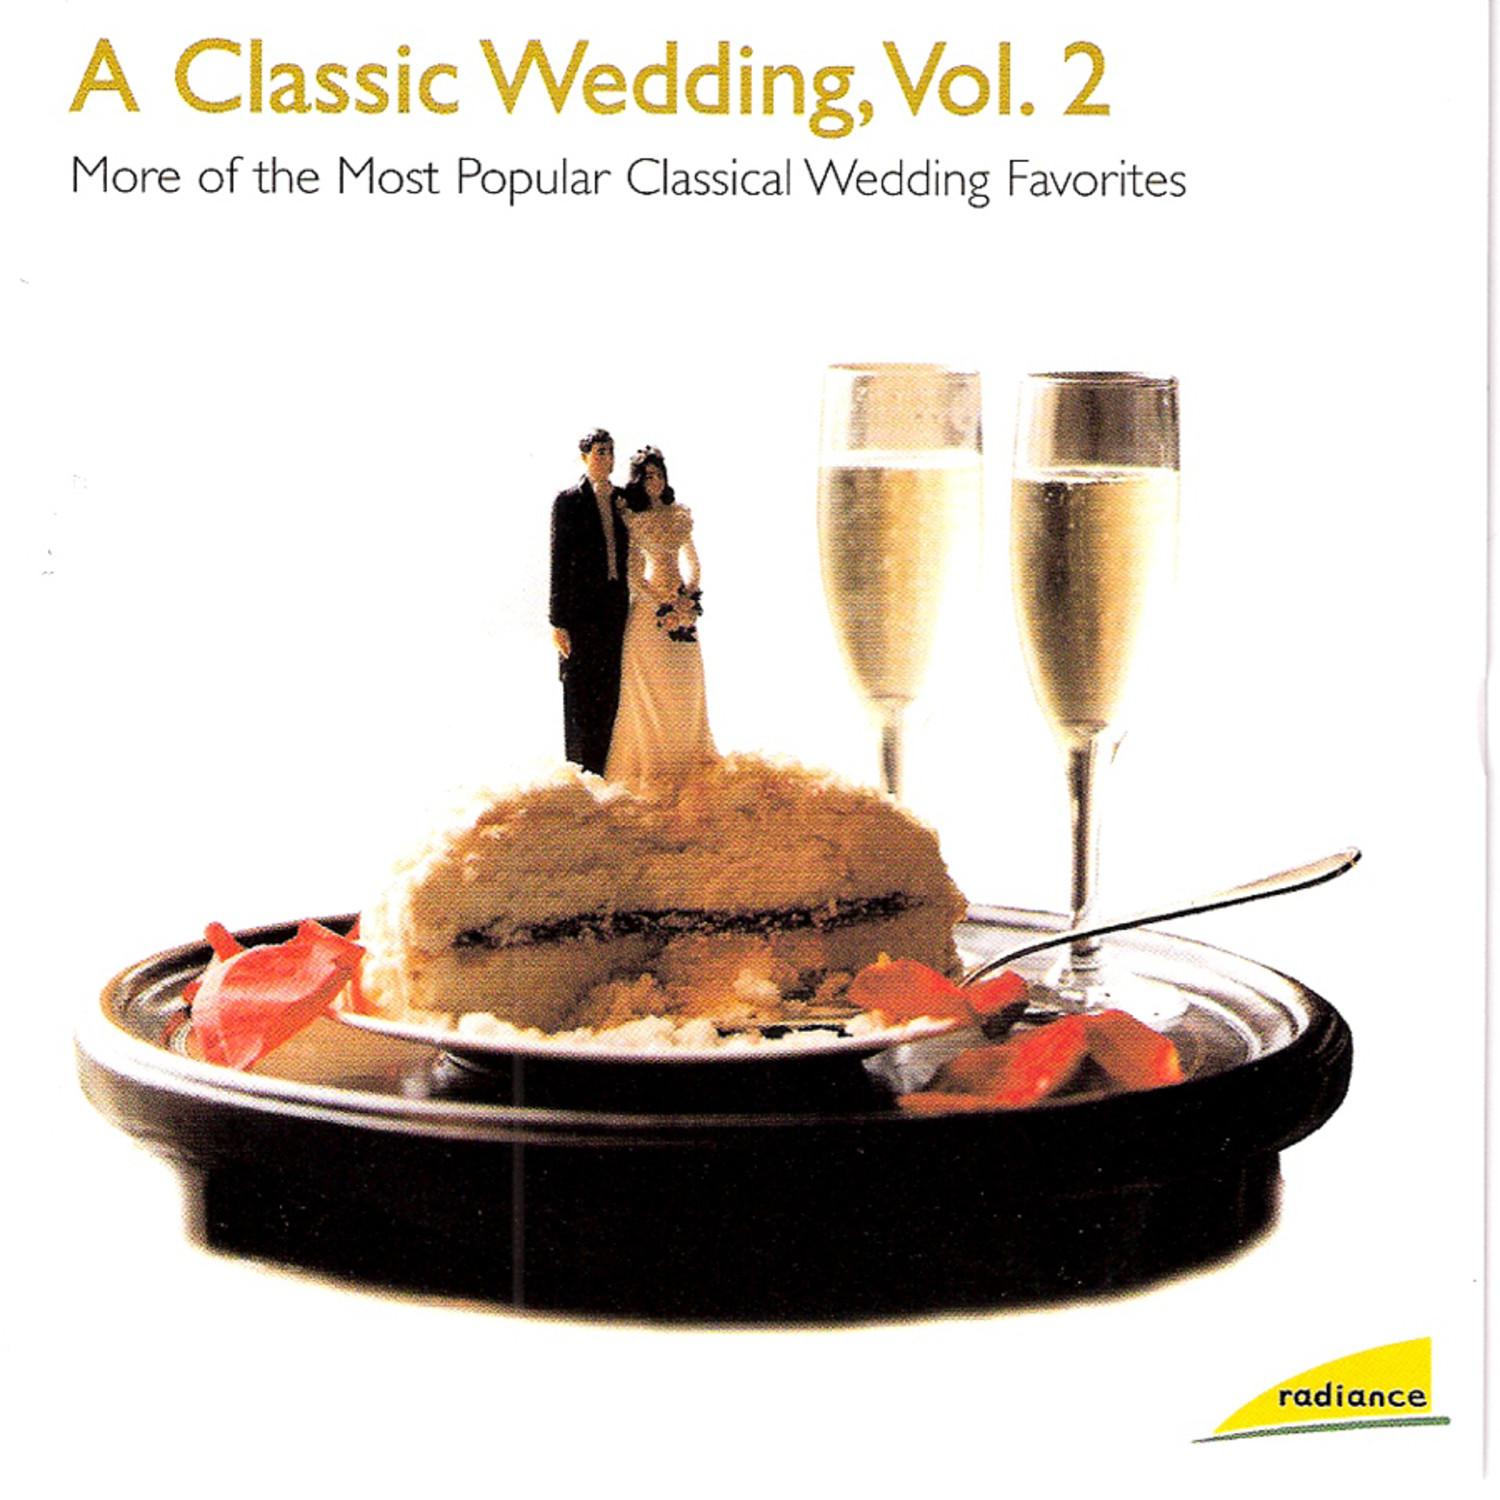 The Marriage of Figaro, K. 492: Overture